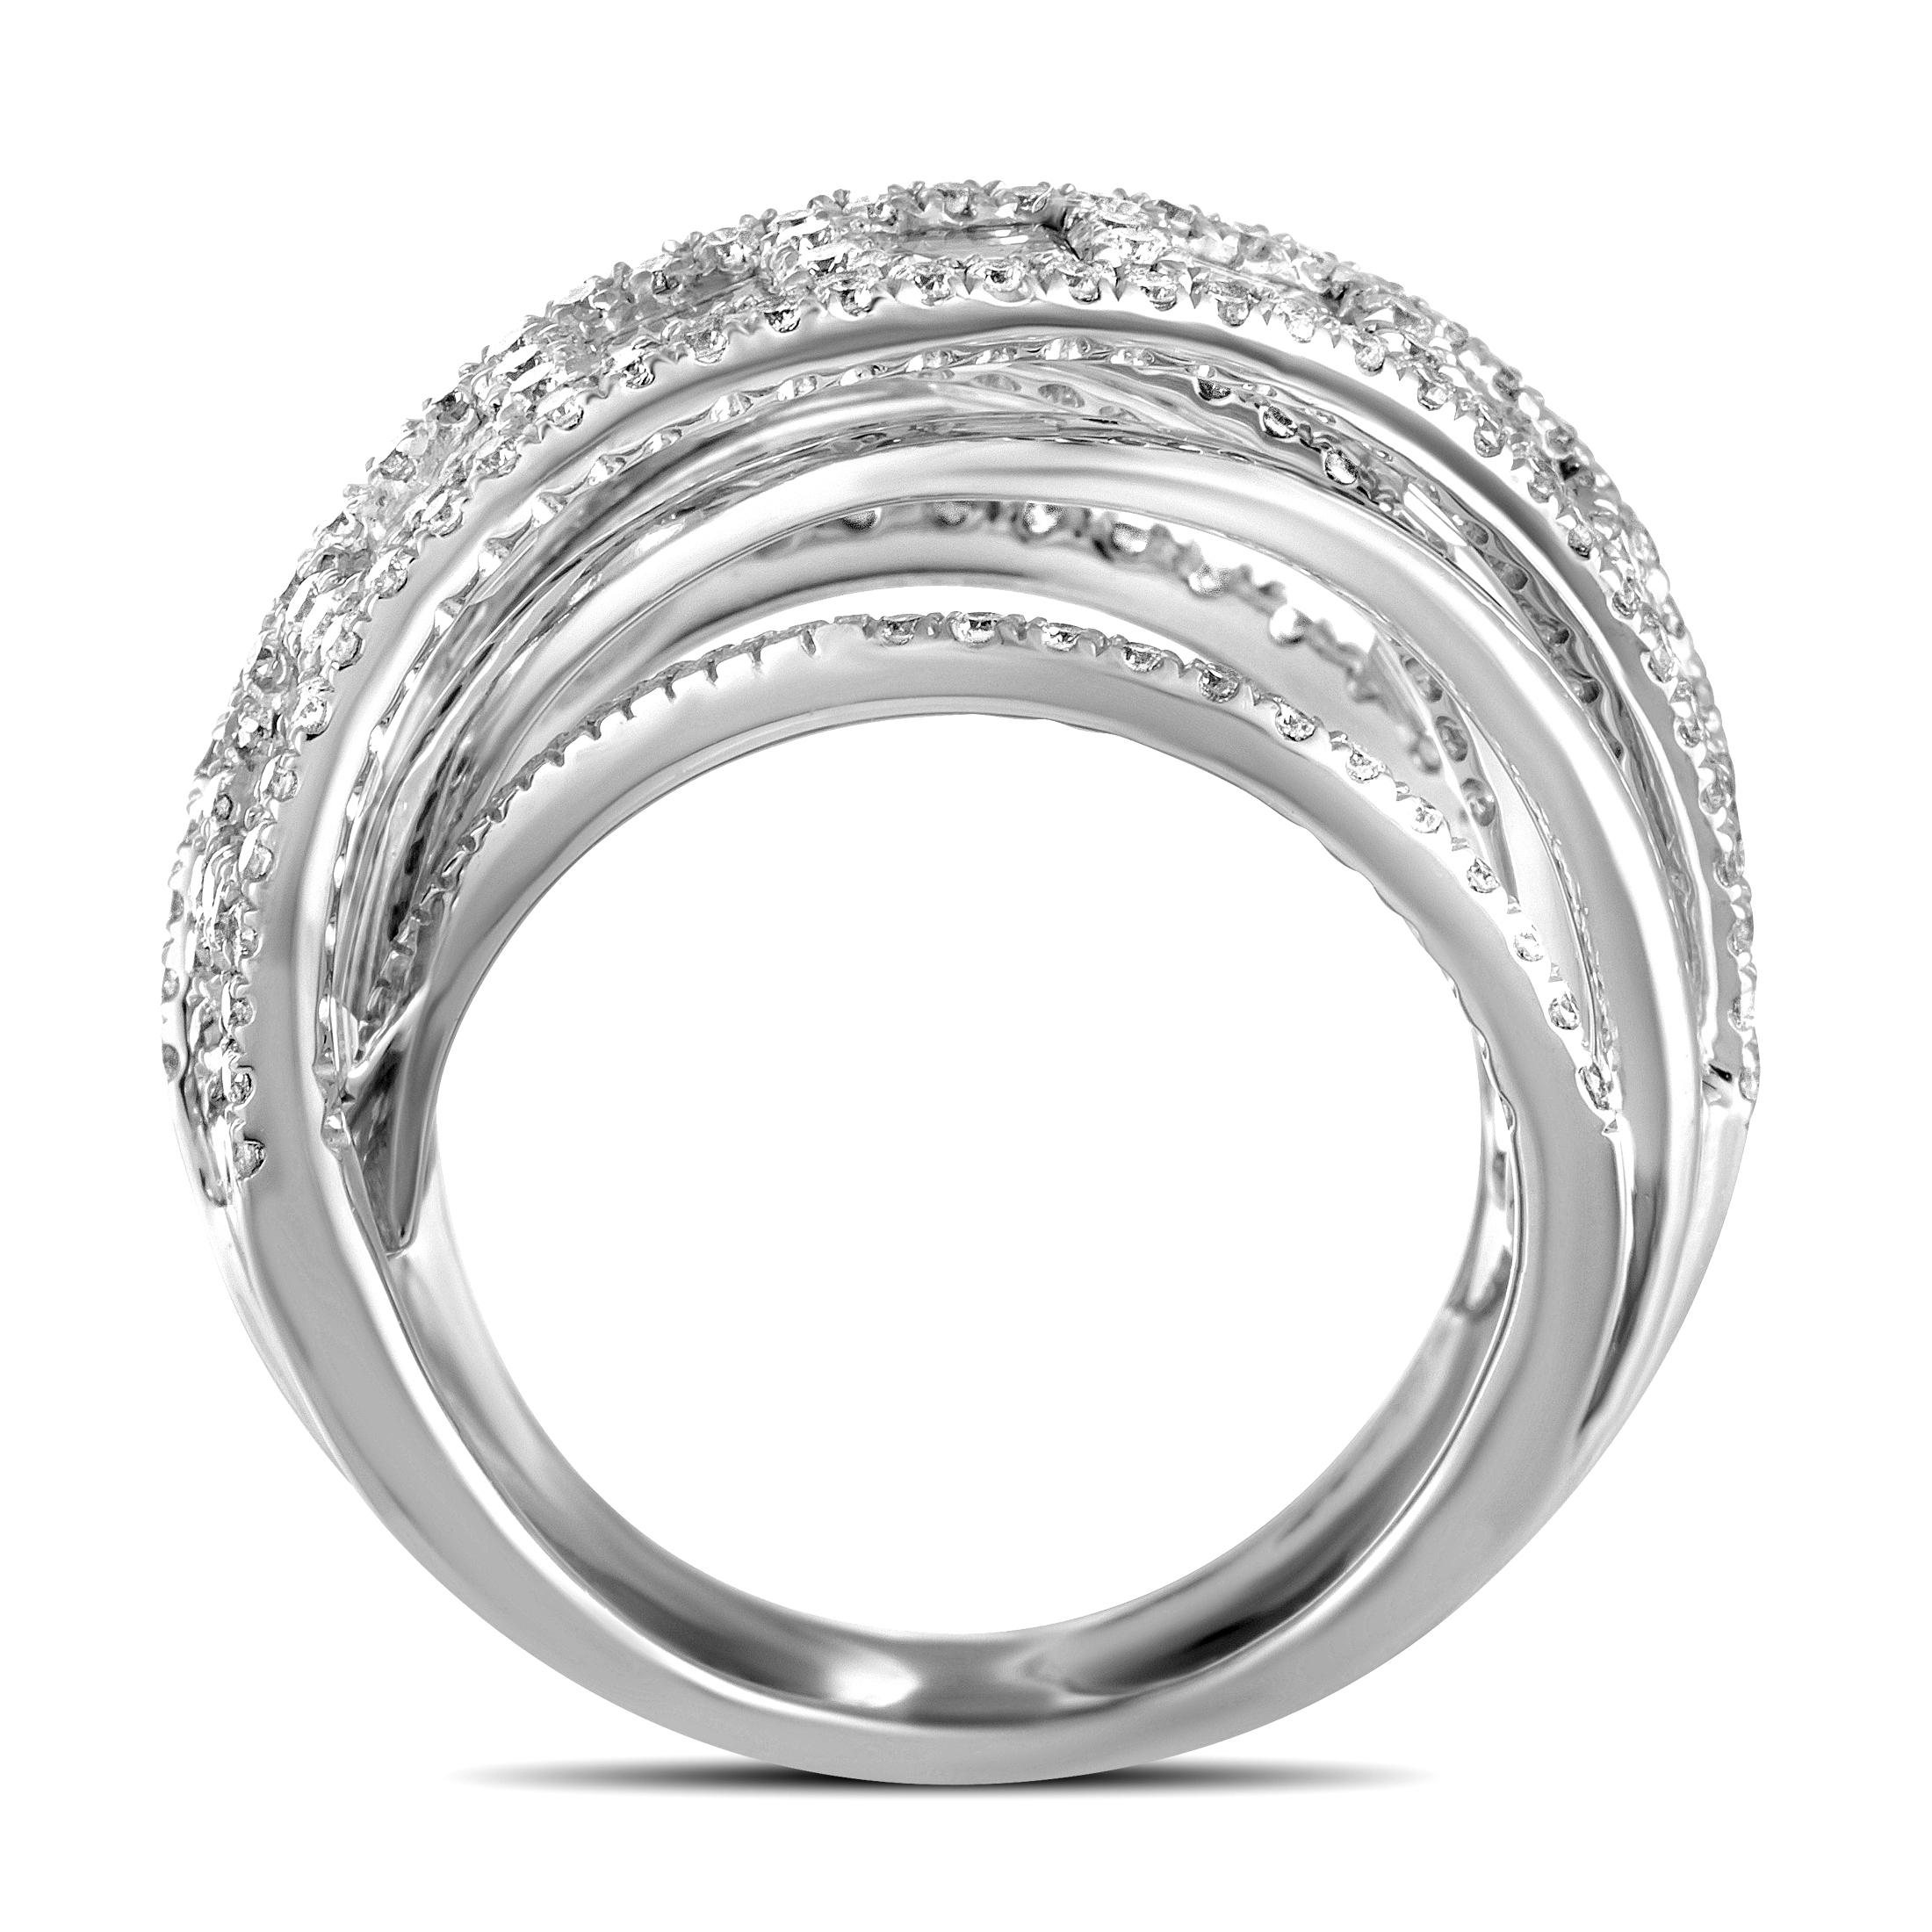 This LB Exclusive ring is crafted from 18K white gold and weighs 12.5 grams, boasting a total of 3.30 carats of diamonds (1.14 carats of round ones and 2.16 carats of baguette ones). Band thickness and ring top height measure 8 and 8 mm